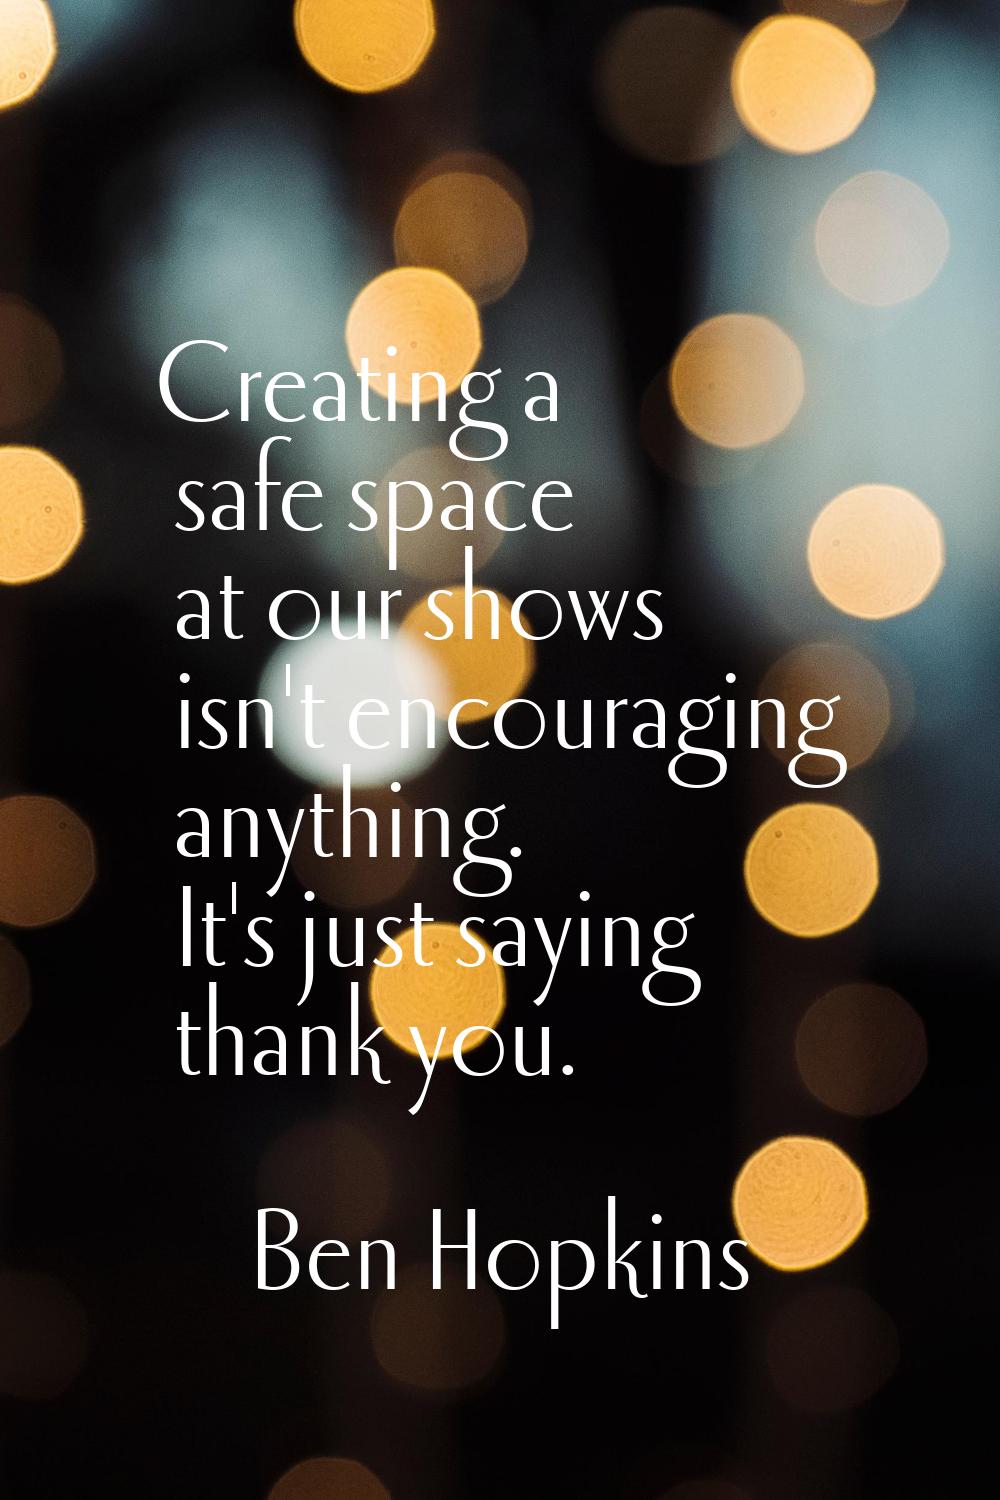 Creating a safe space at our shows isn't encouraging anything. It's just saying thank you.